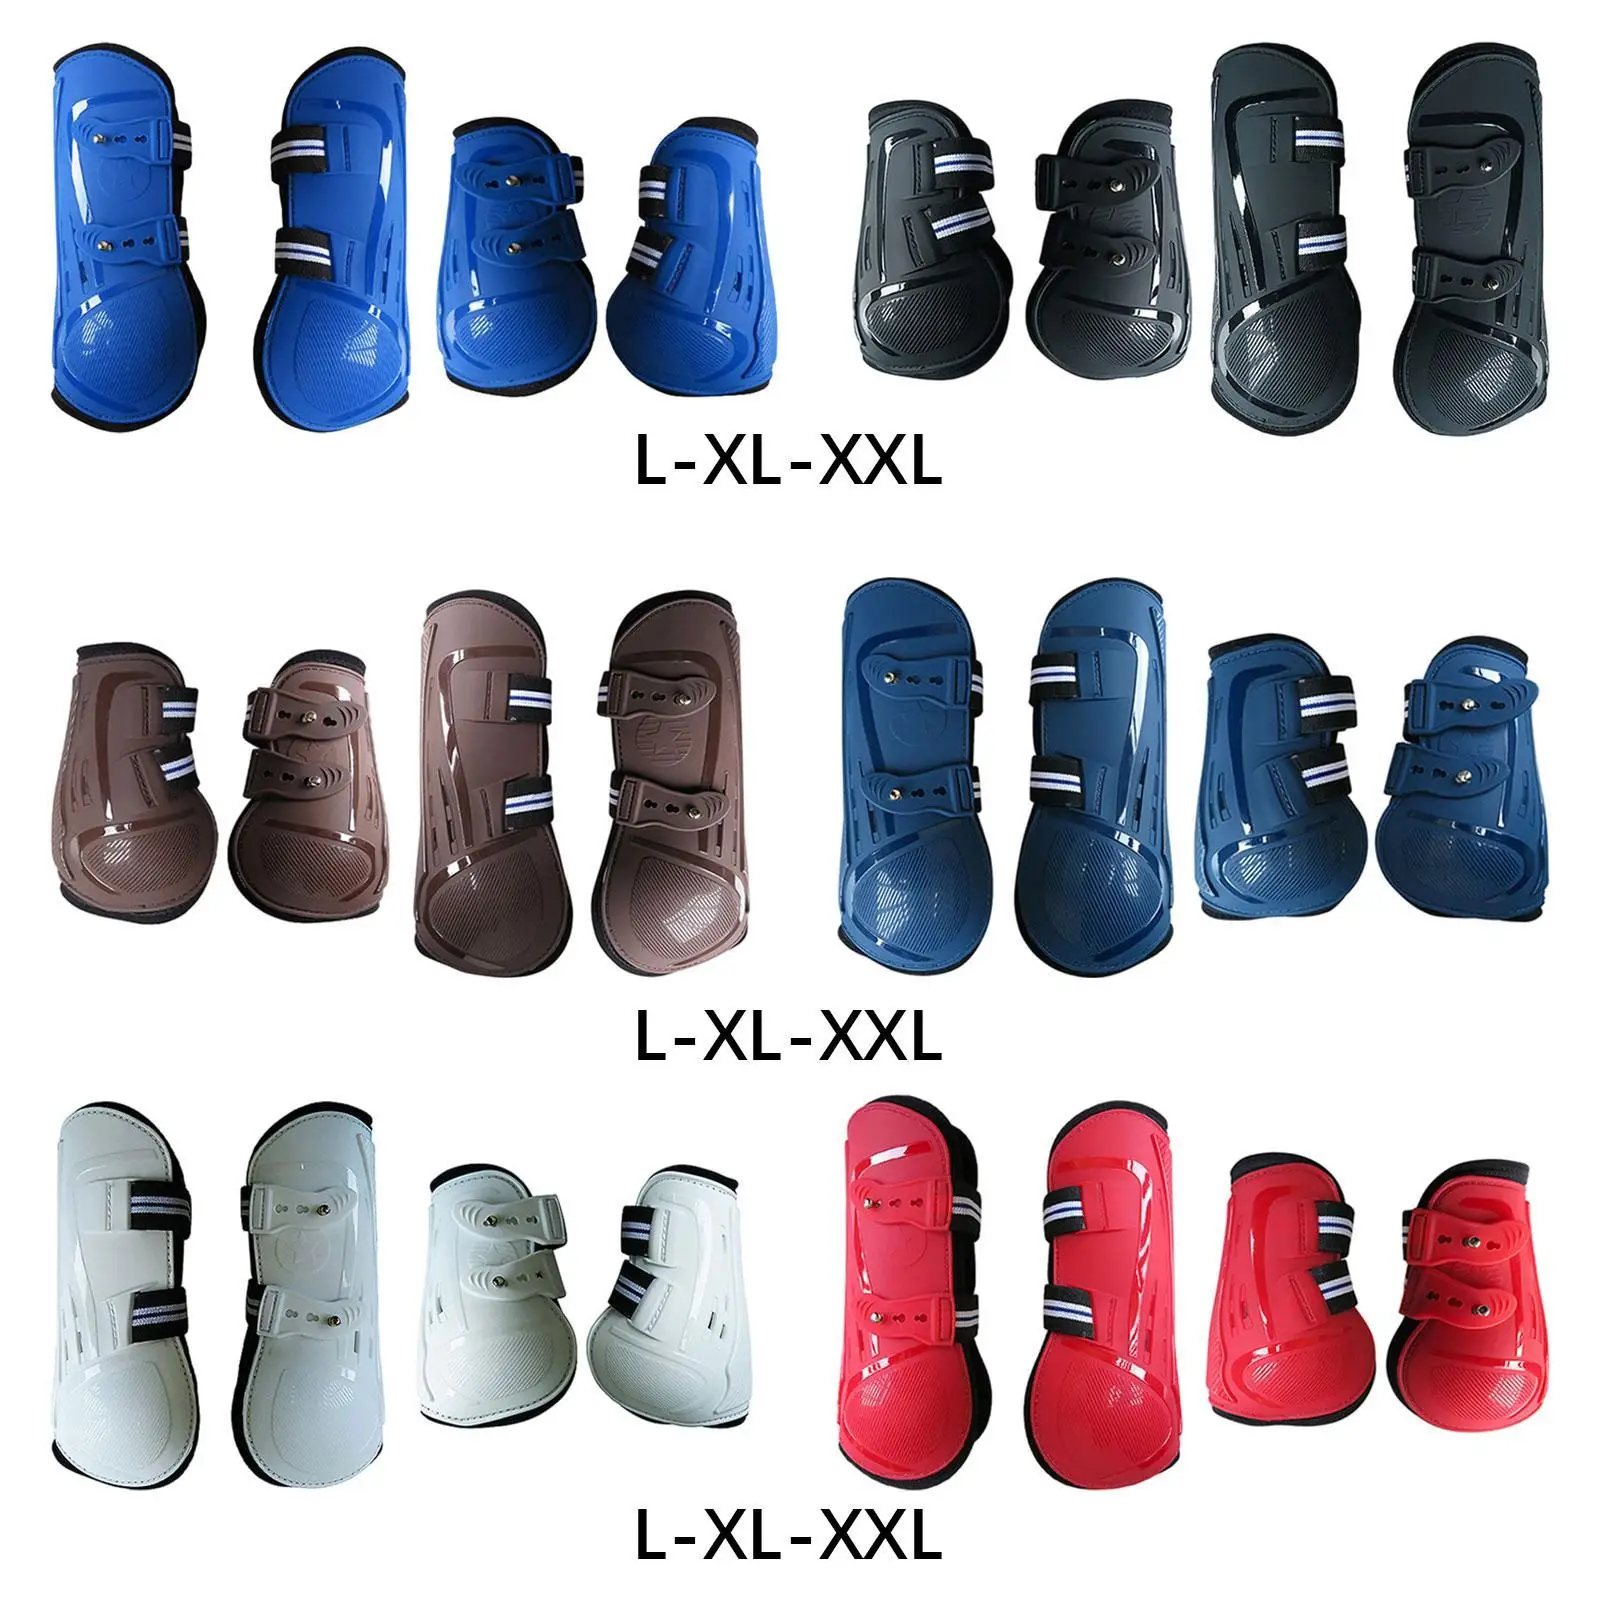 

4x Horses Boots Breathable Portable PU Neoprene Shock Absorbing Leg Guard for